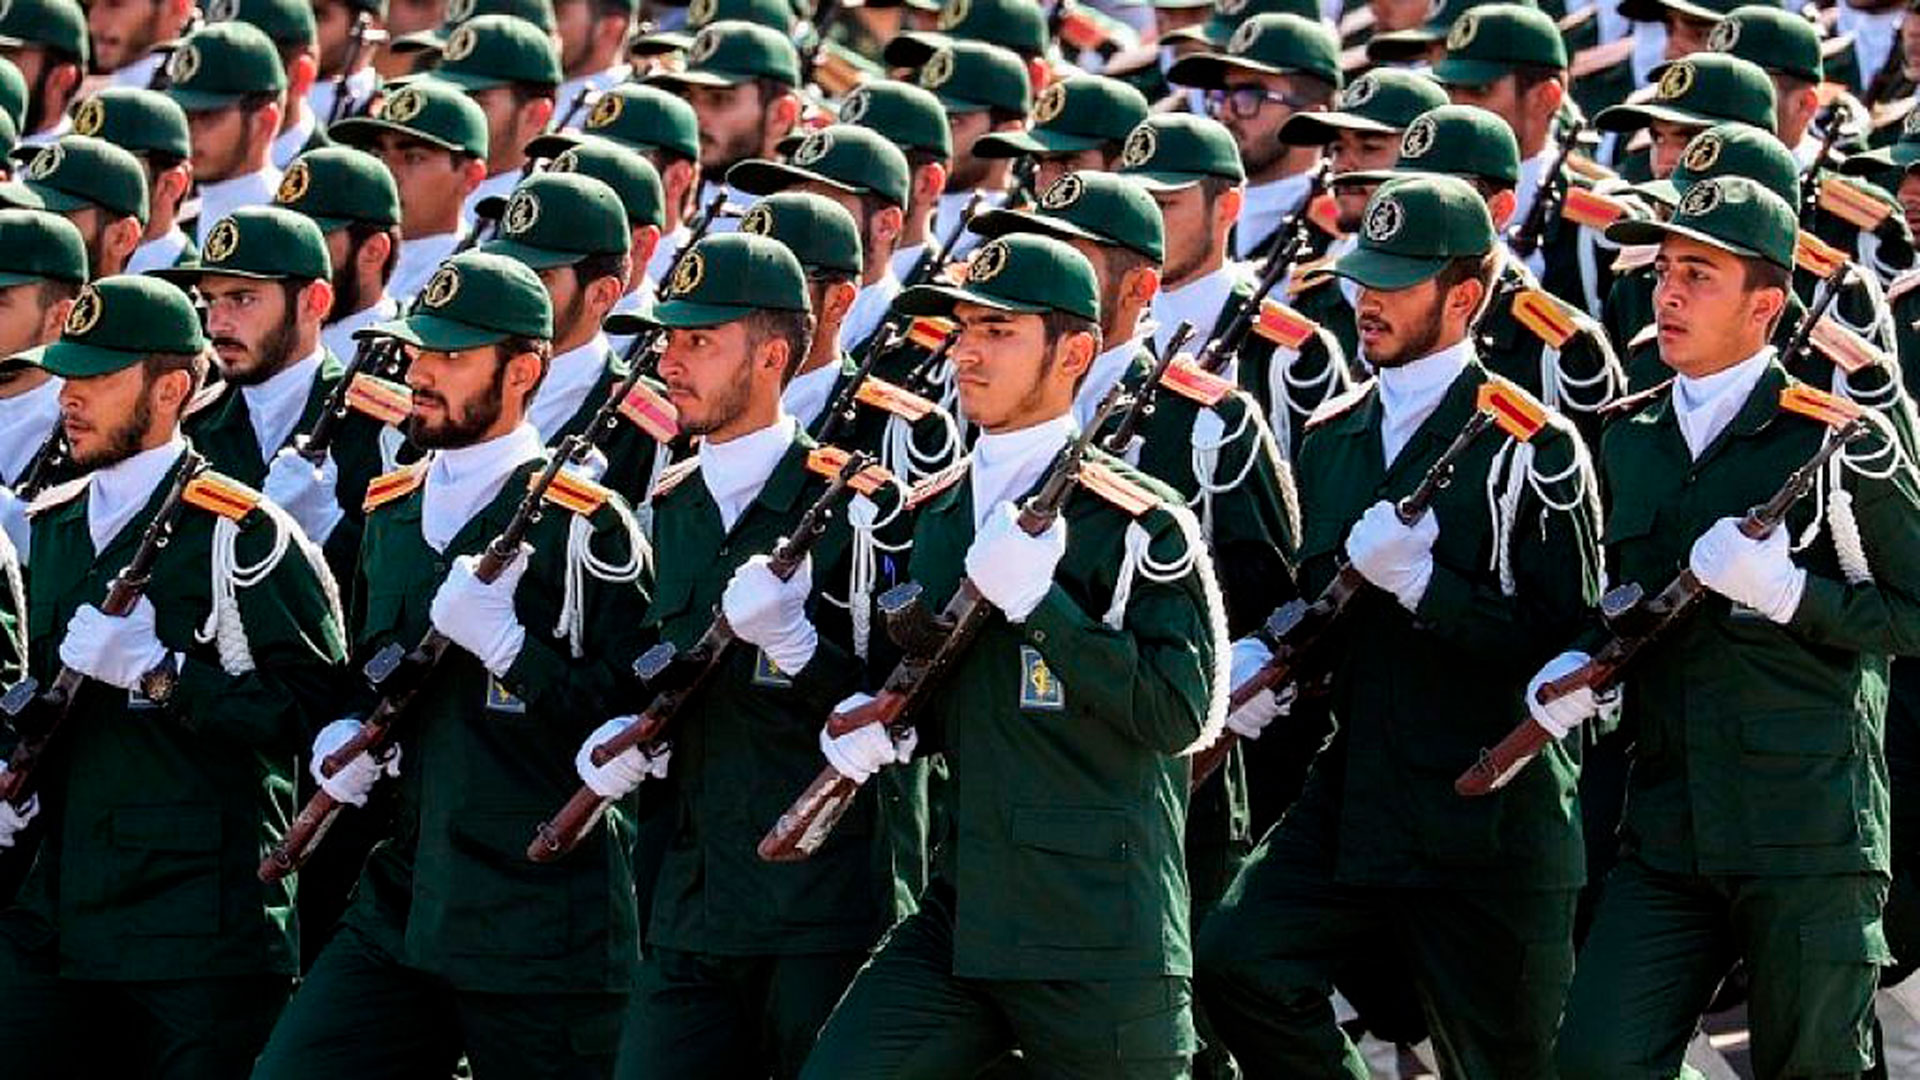 Iran's Revolutionary Guard is considered a terrorist group by the US and Israel